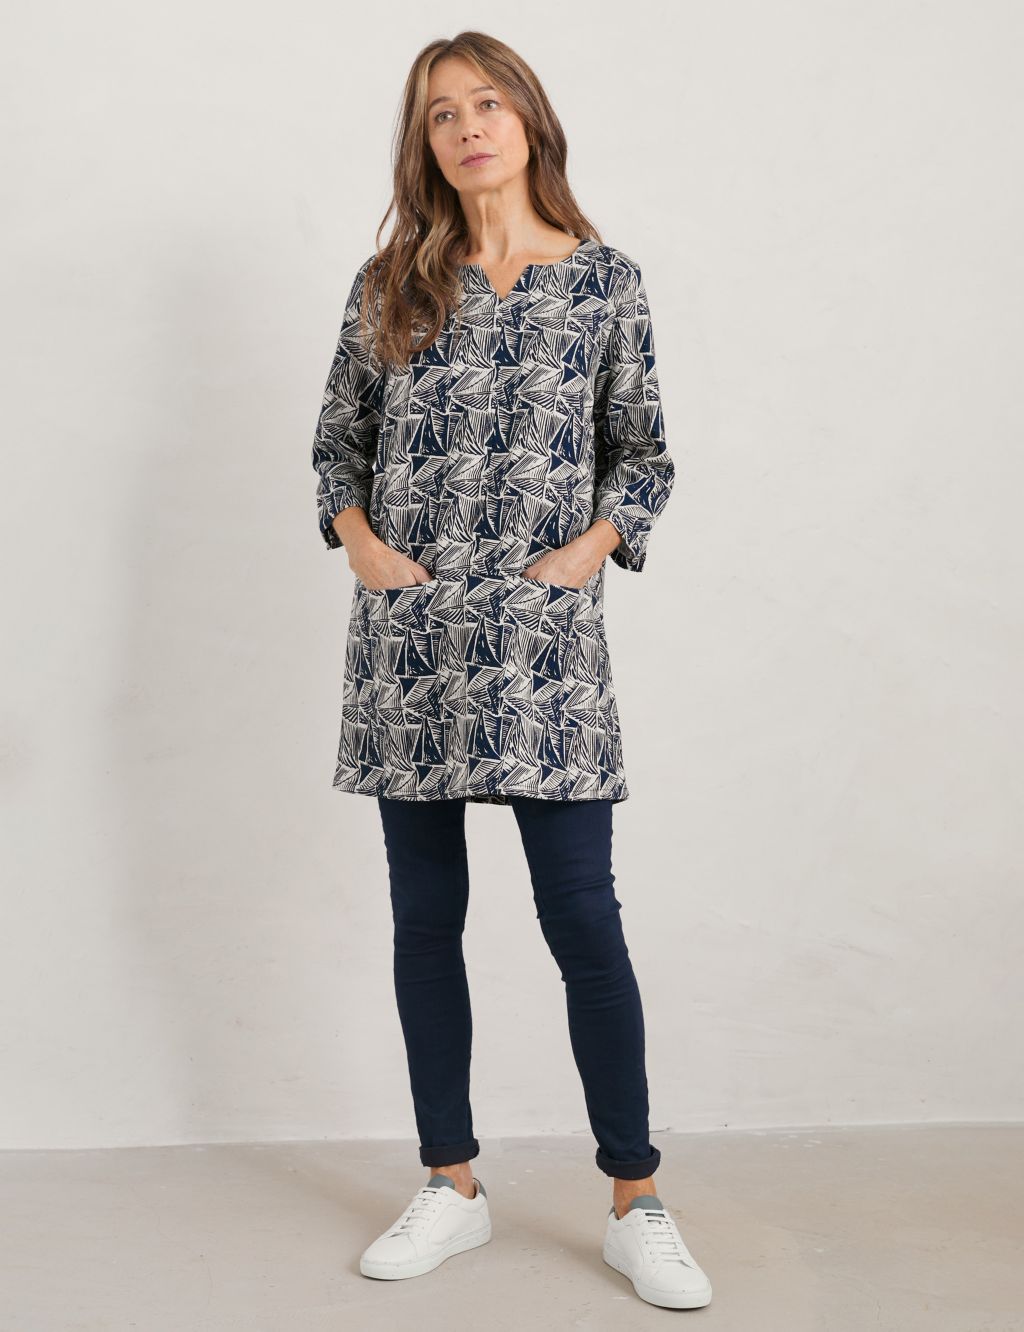 Cotton Blend Printed Tunic image 1